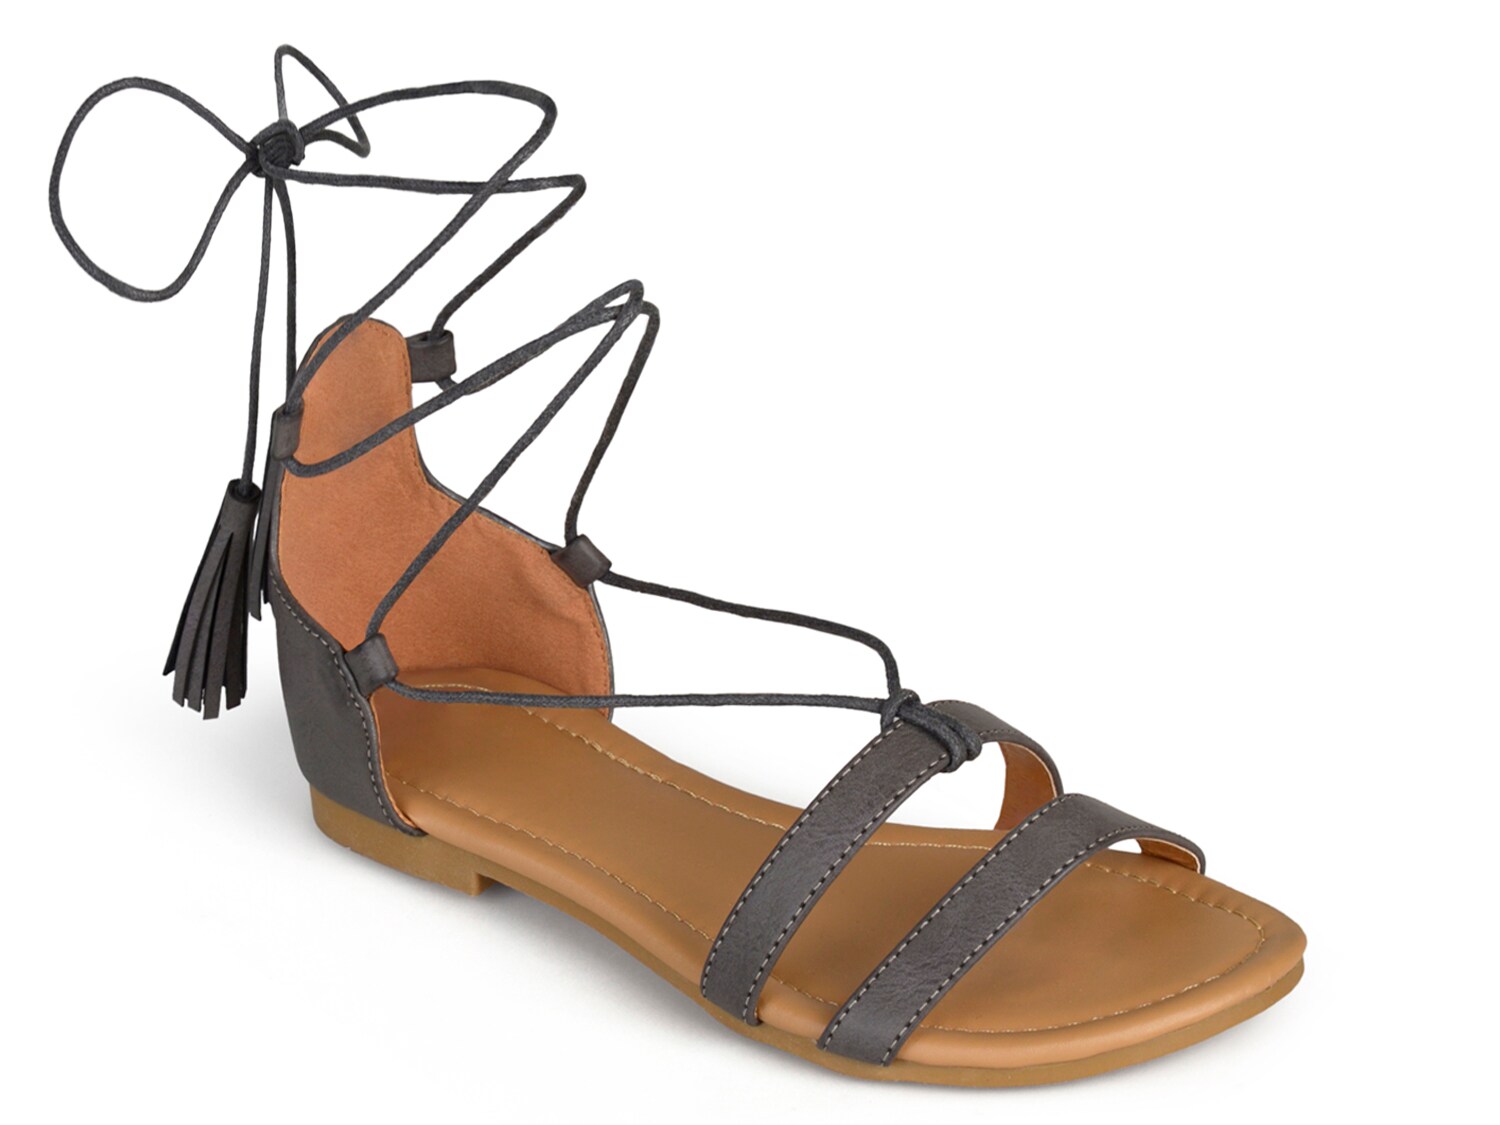 Journee Collection Amee Flat Sandal - Free Shipping | DSW